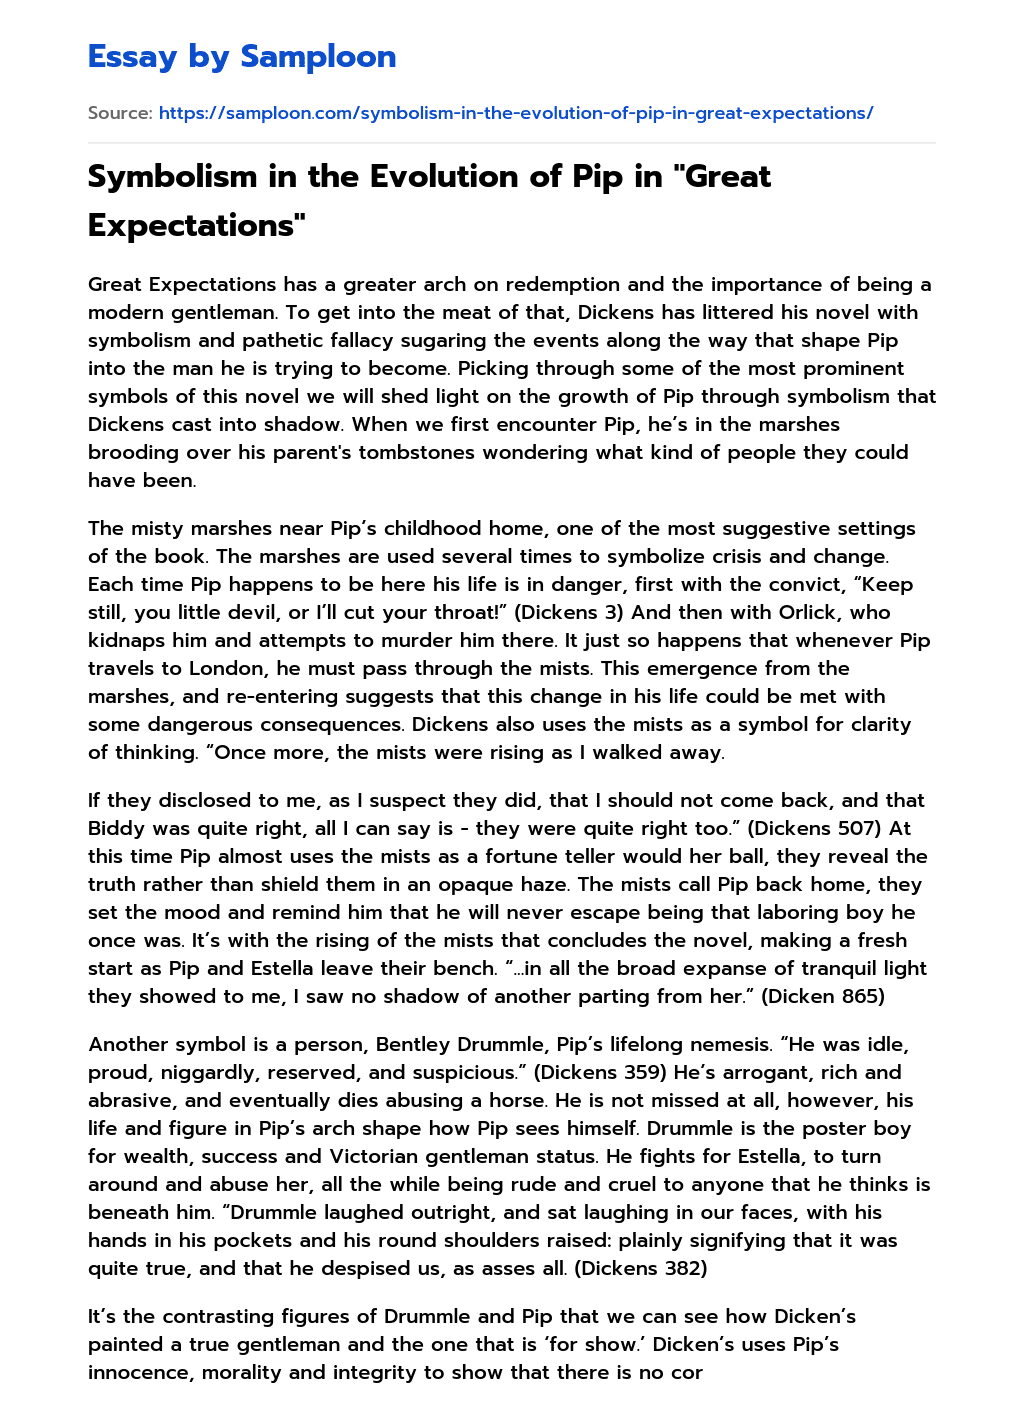 Symbolism in the Evolution of Pip in “Great Expectations” essay